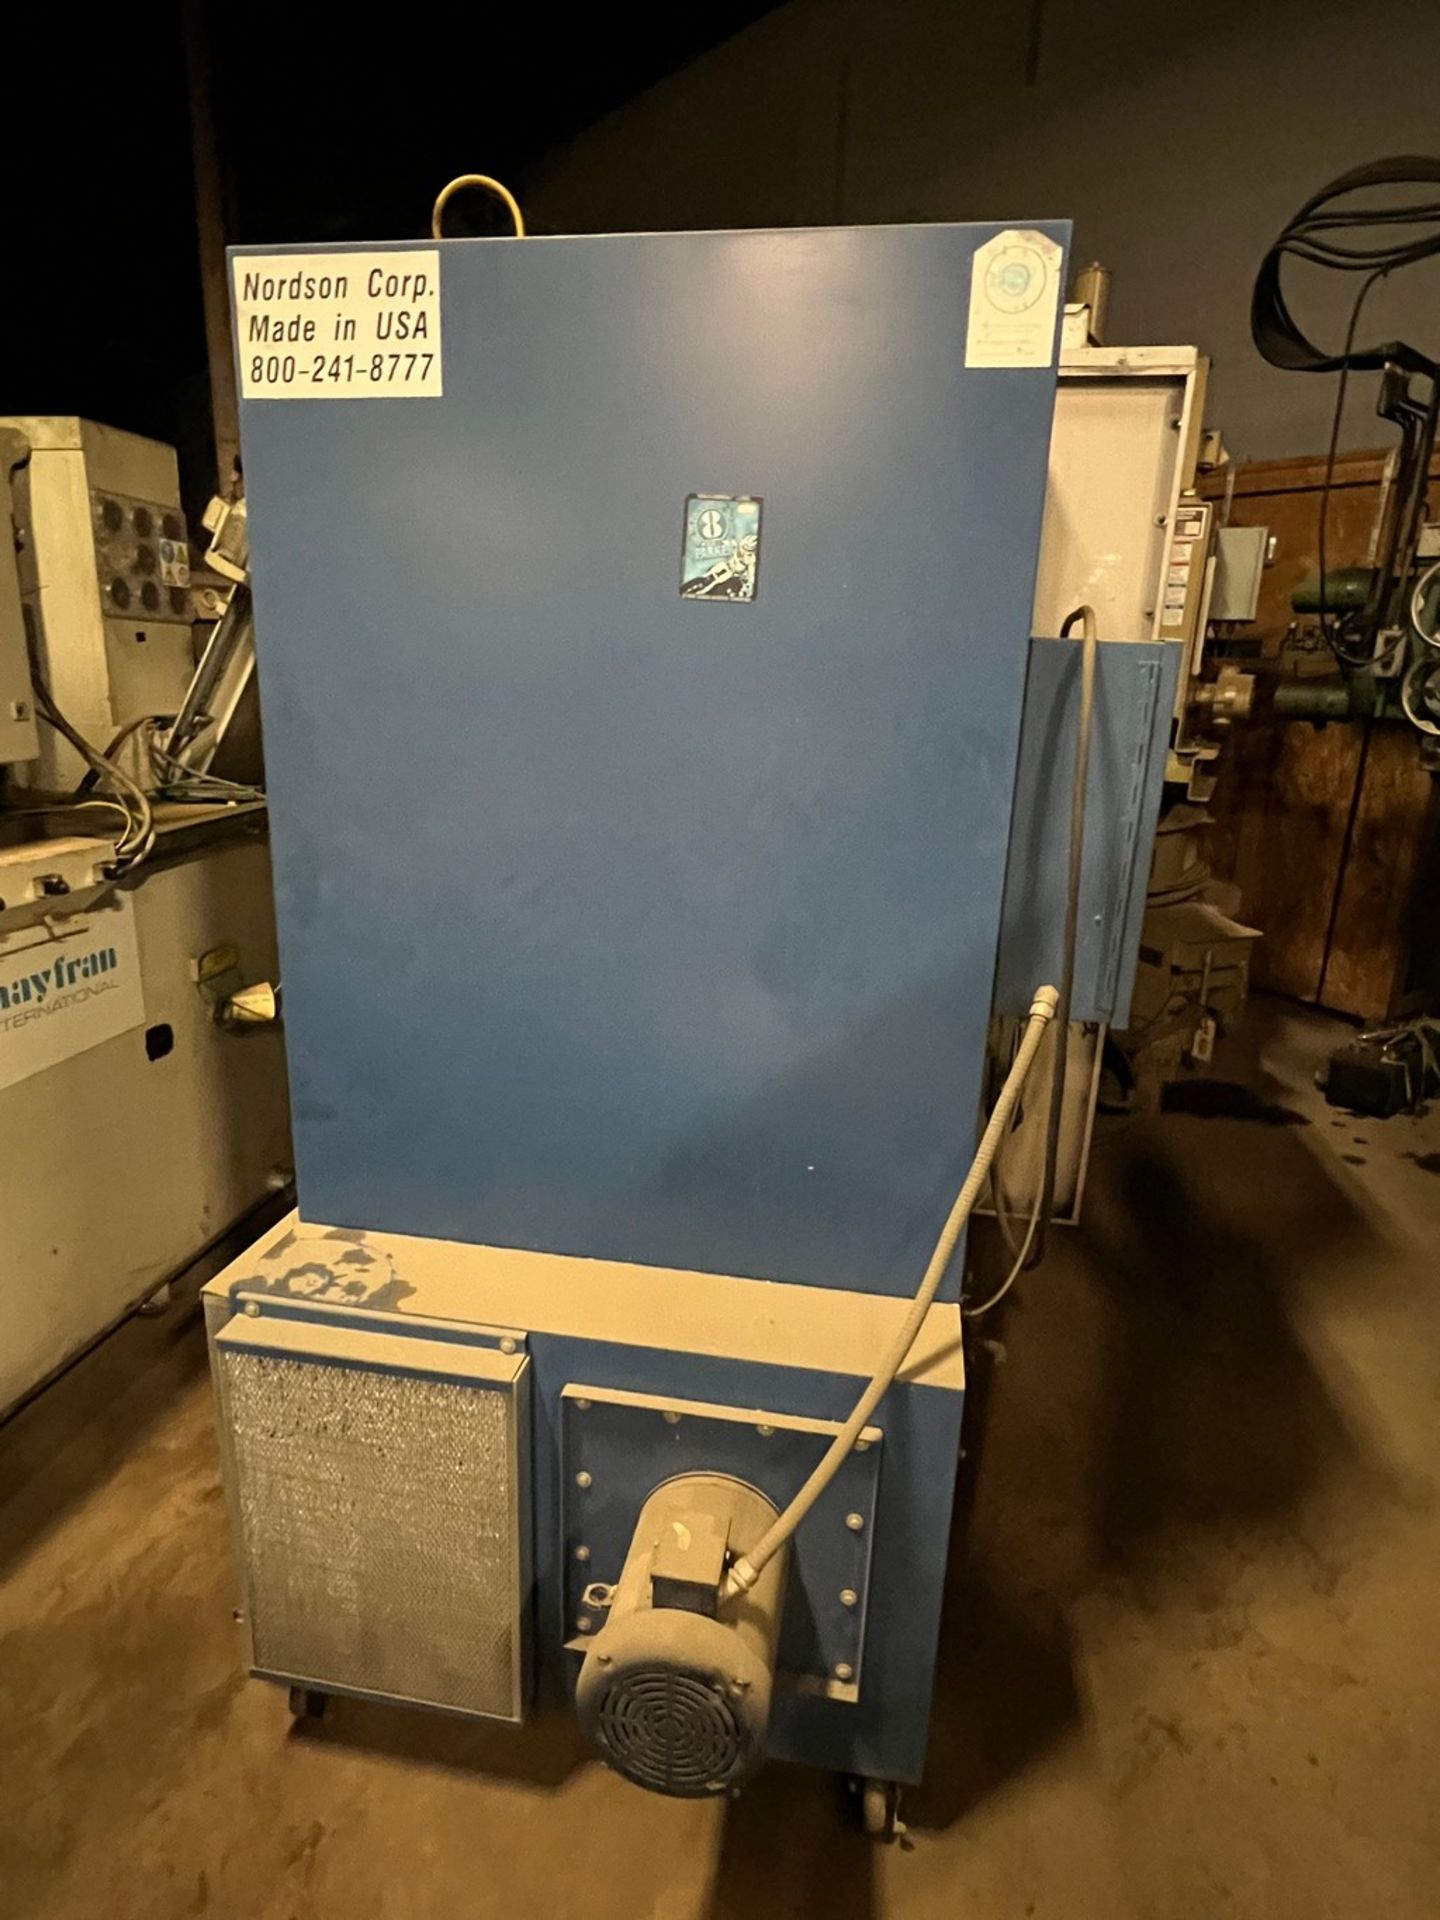 Nordson NVC-4 Paint Booth, 60" x 60" x 60" - Image 2 of 3